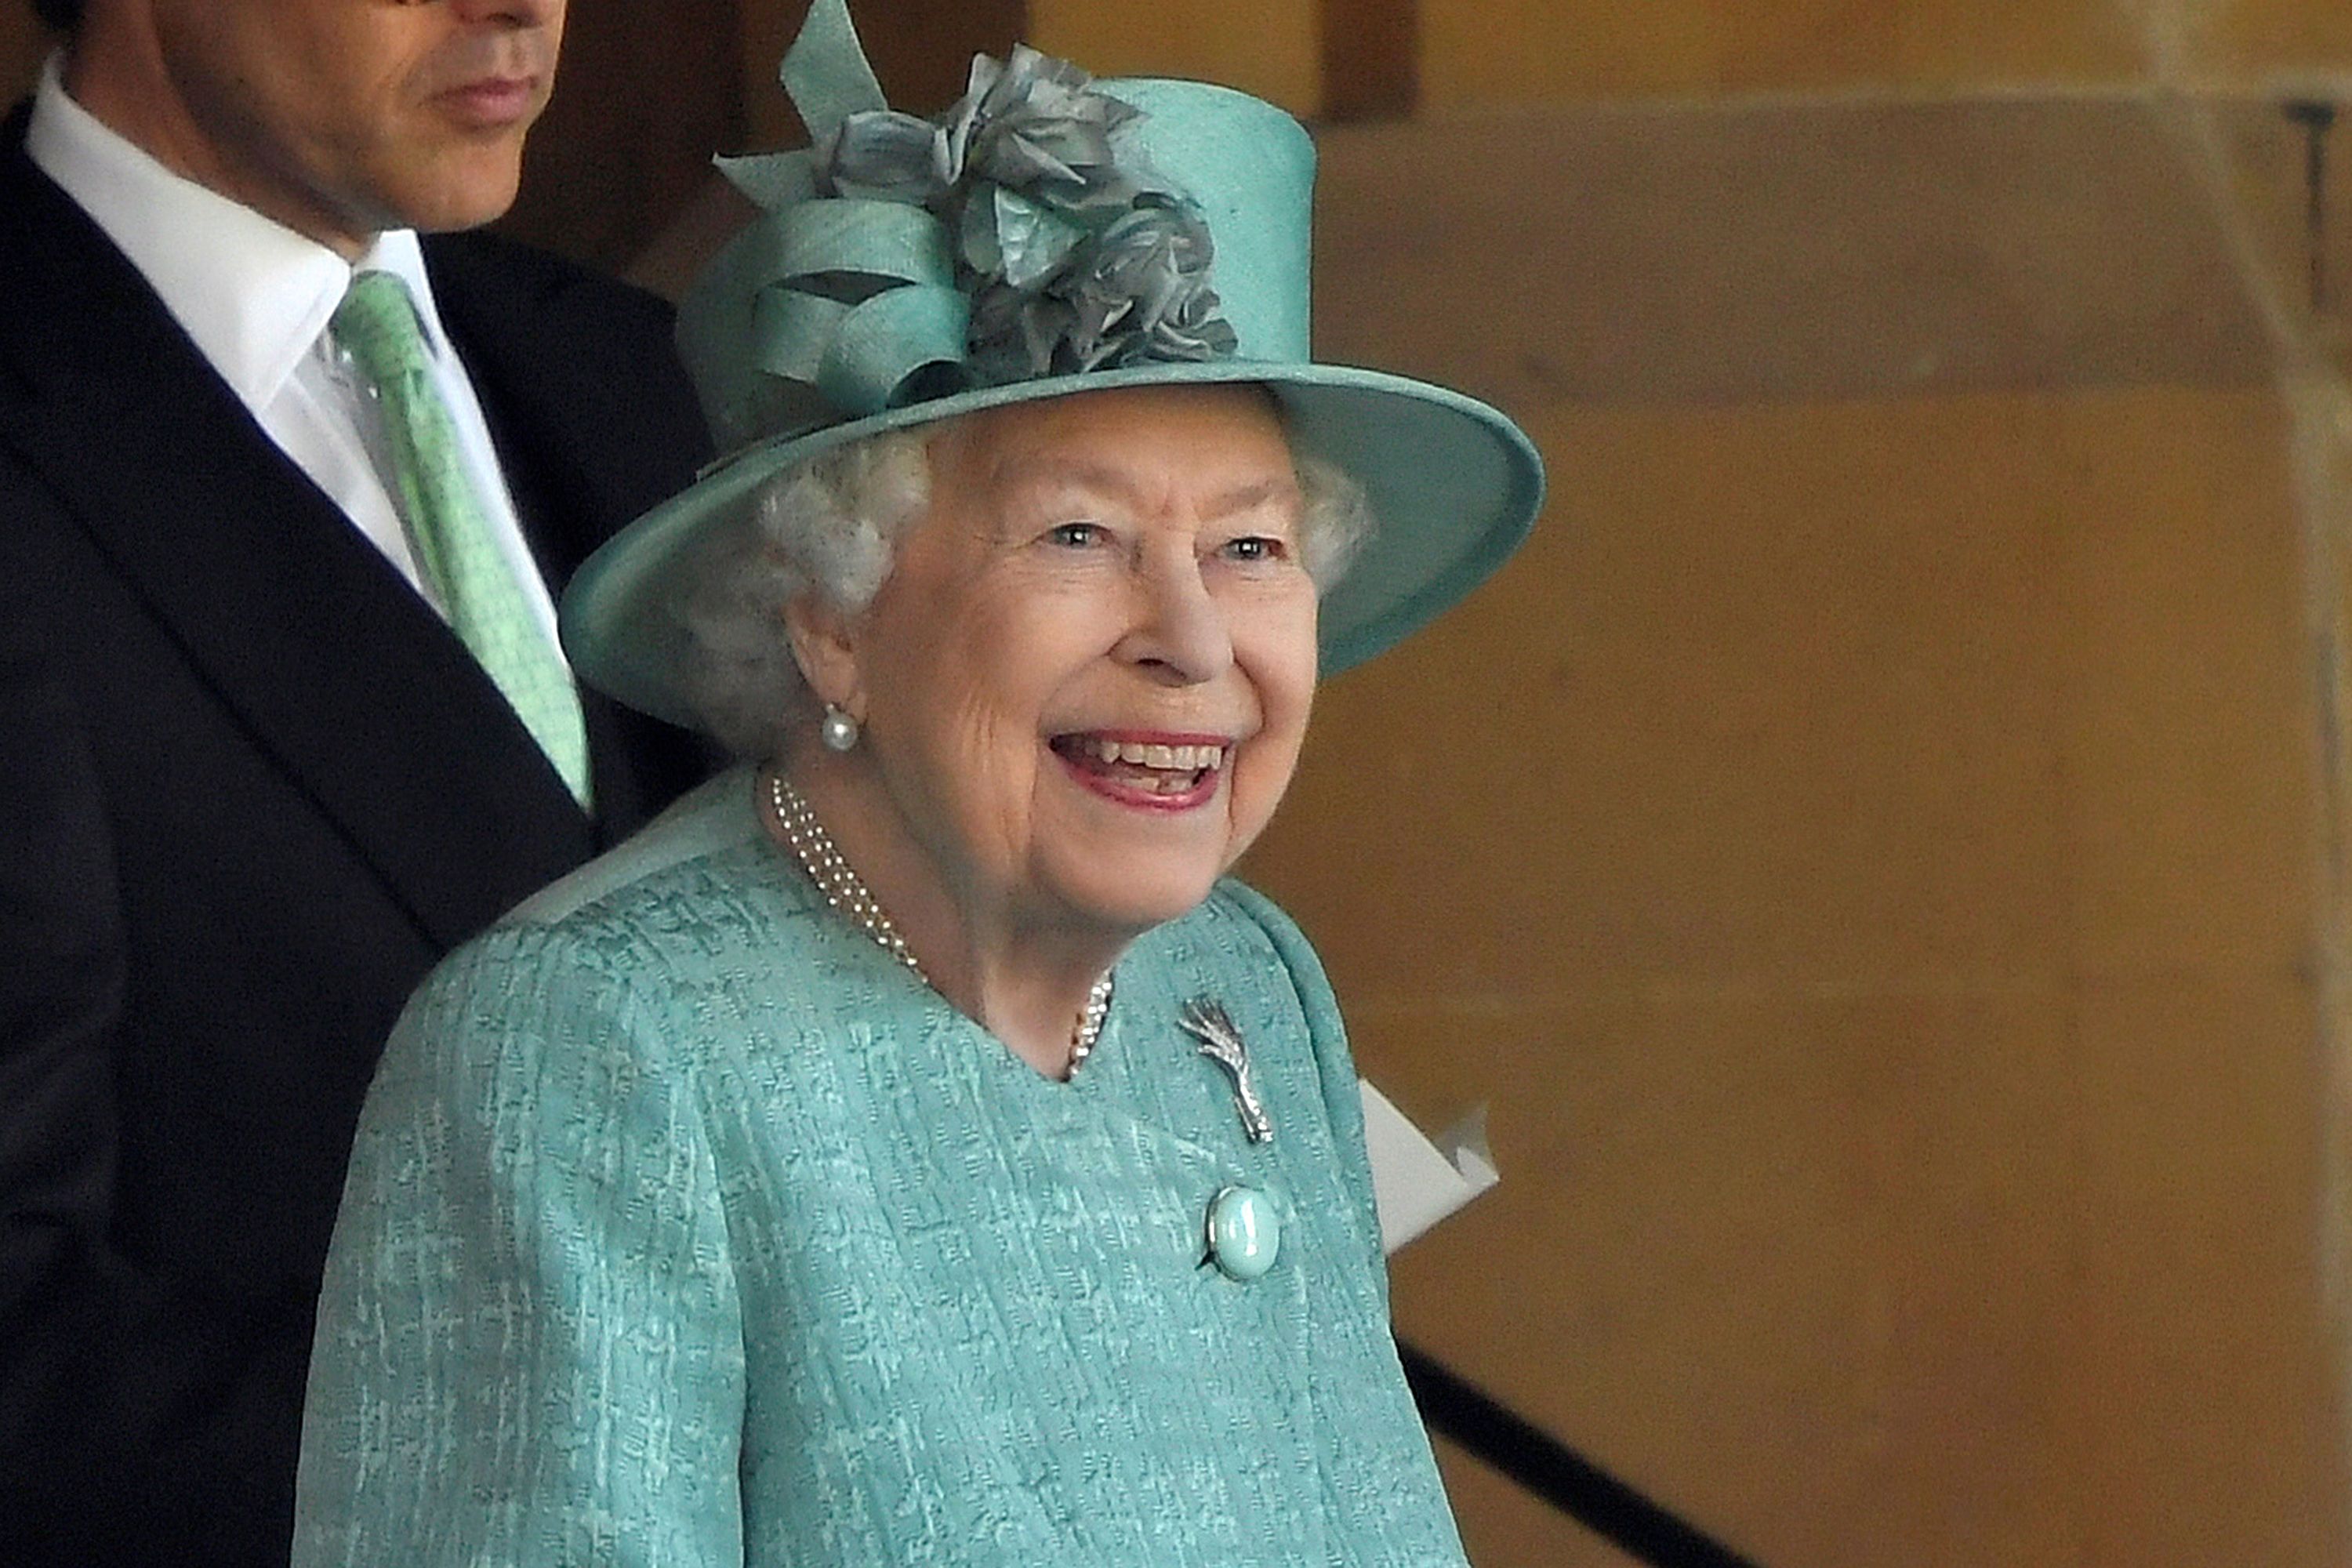 Queen Elizabeth Attends Birthday Ceremony After Trooping The Colour 2020 Canceled